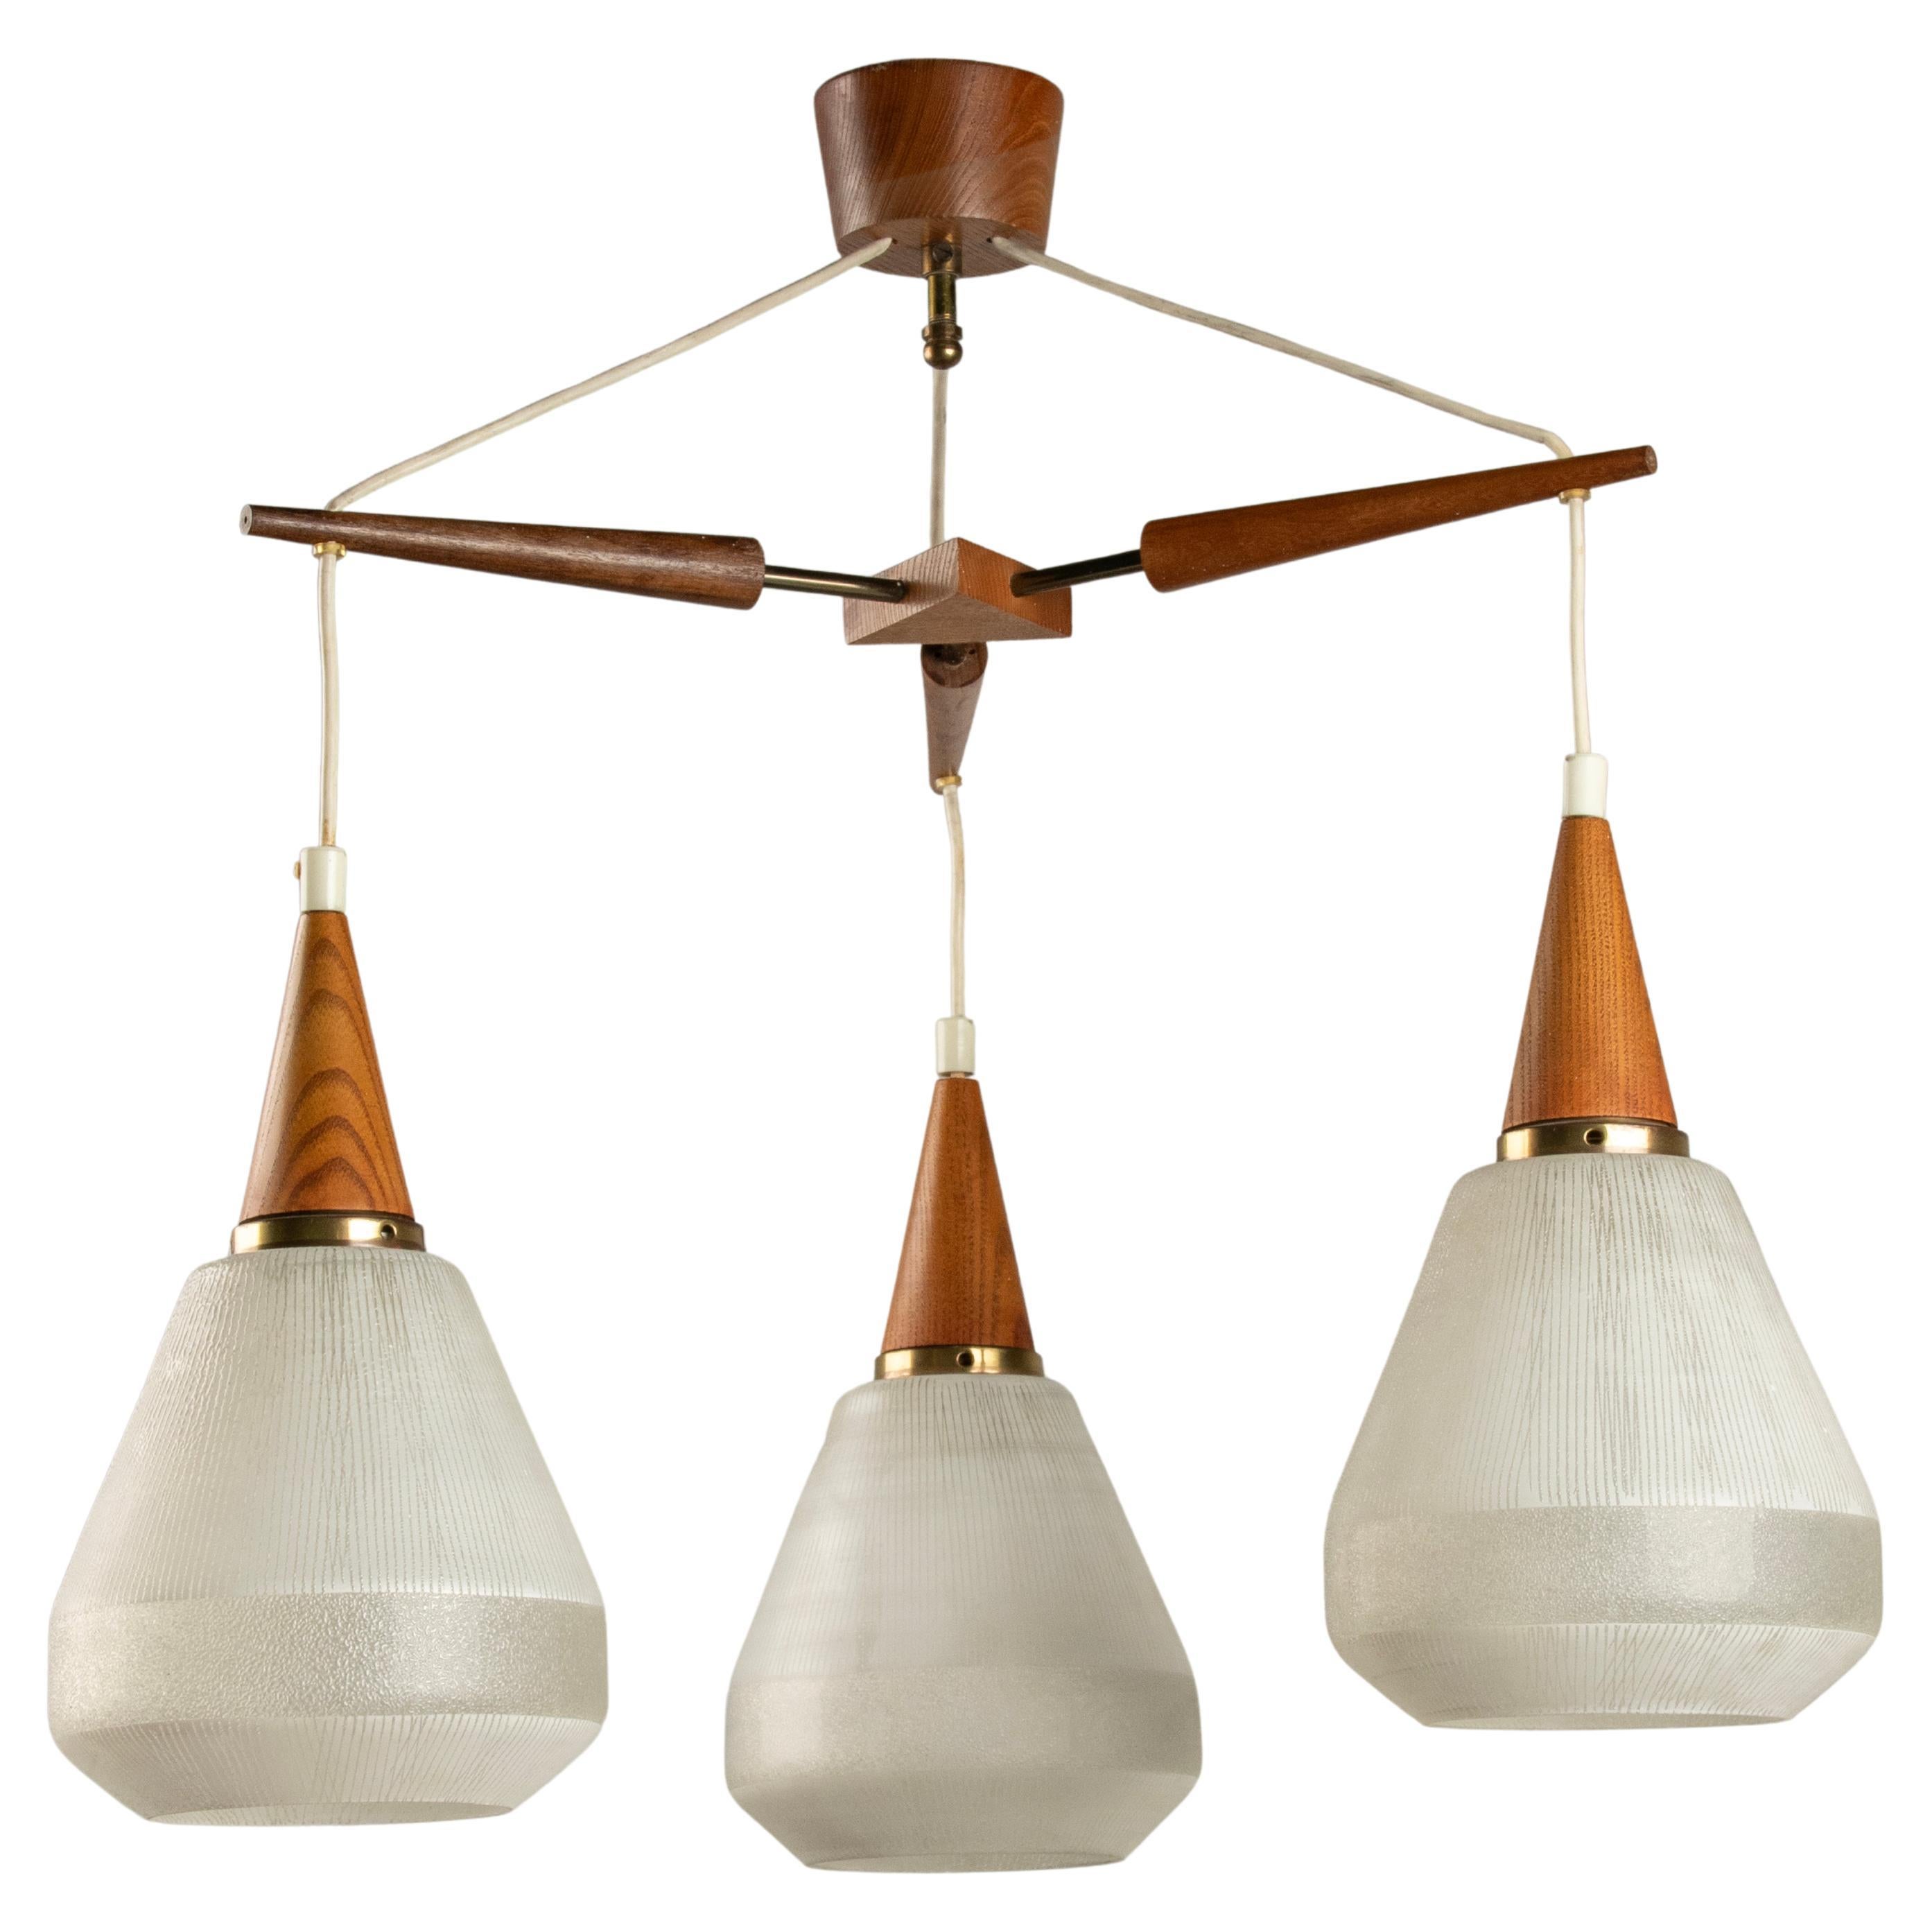 Mid 20th Century Danish Teakwood Pendant Lamp - Frosted Glass Shades For Sale